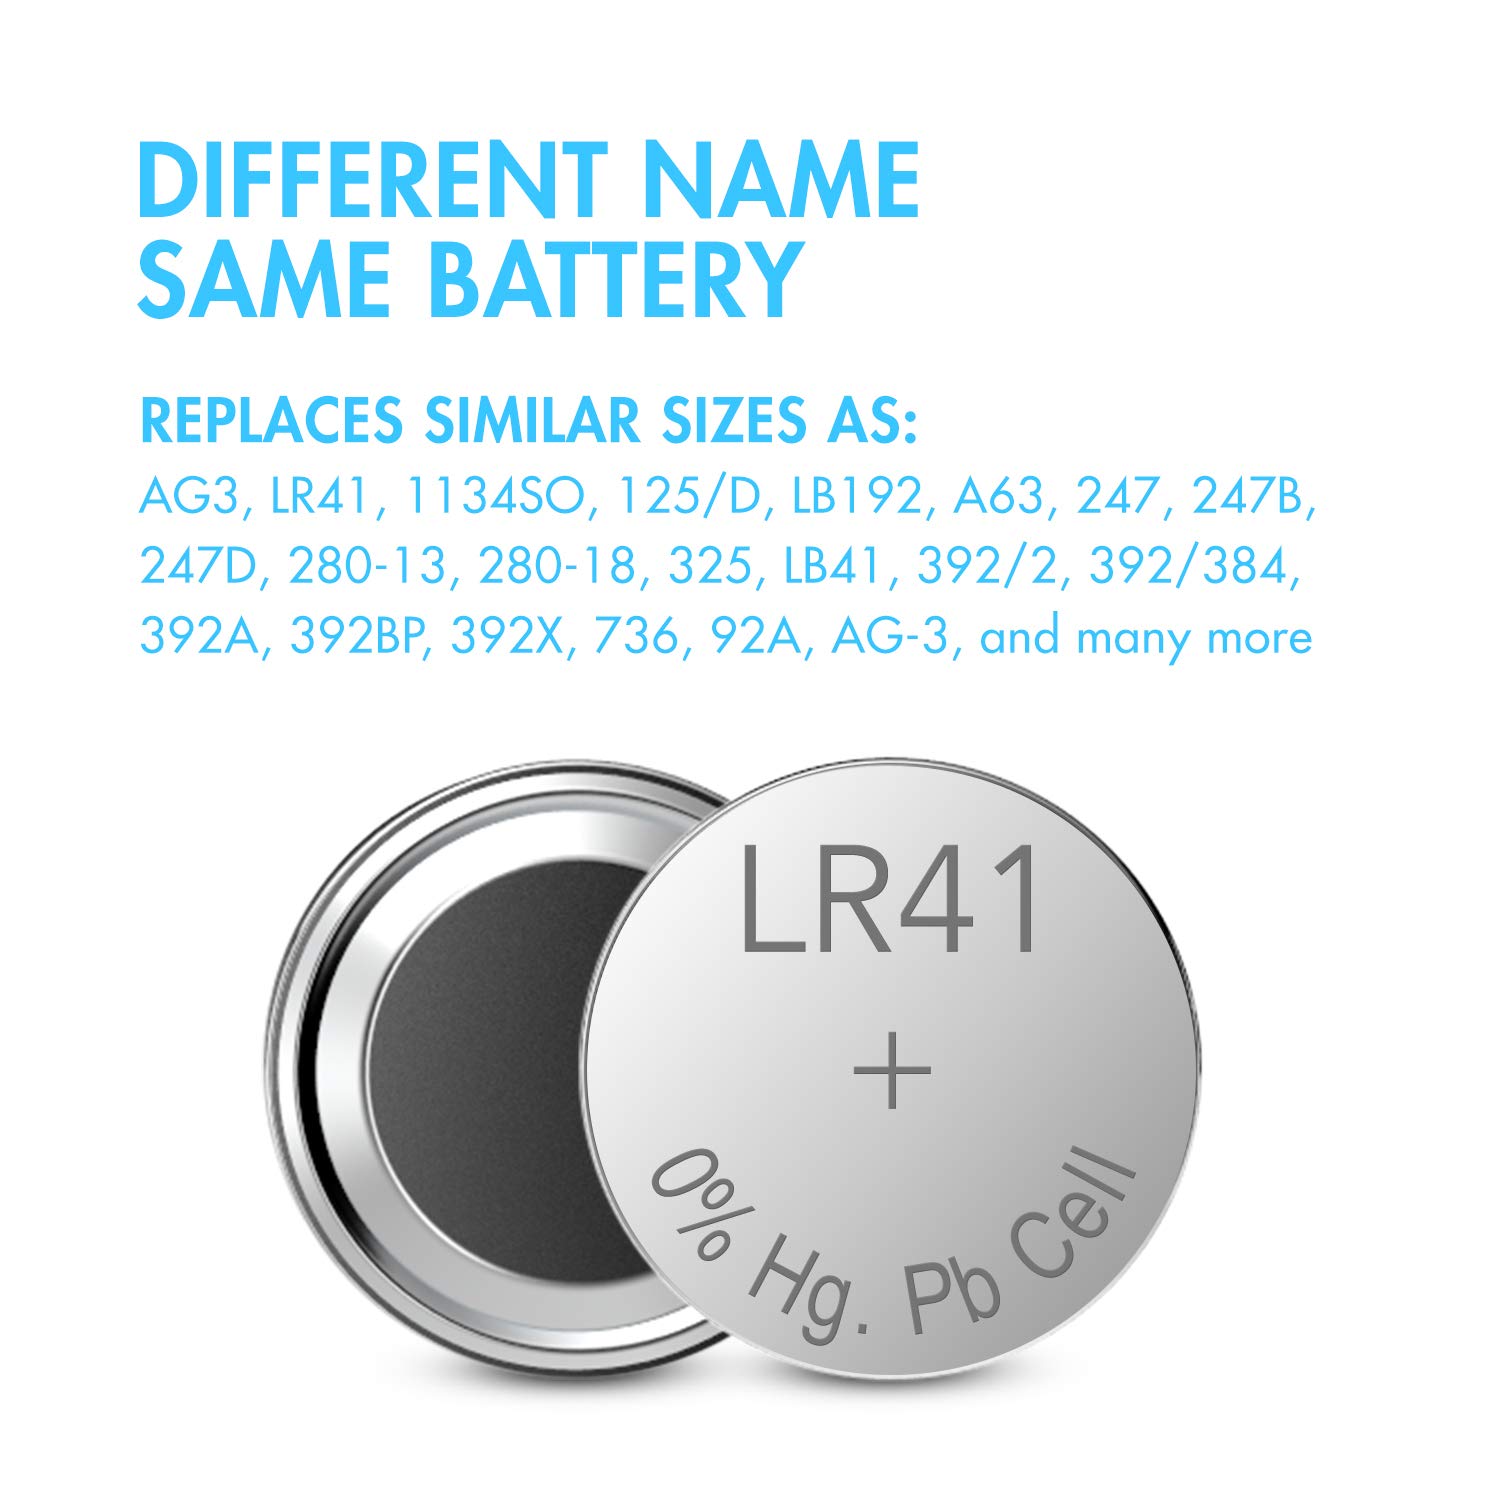 Tenergy 1.5 Volt Battery Button Cell LR41, ag3 Batteries Equivalent, Ideal for thermometers, Watches, Laser Pointers, Small Toys, Portable Electronics, and More - 40 Pack